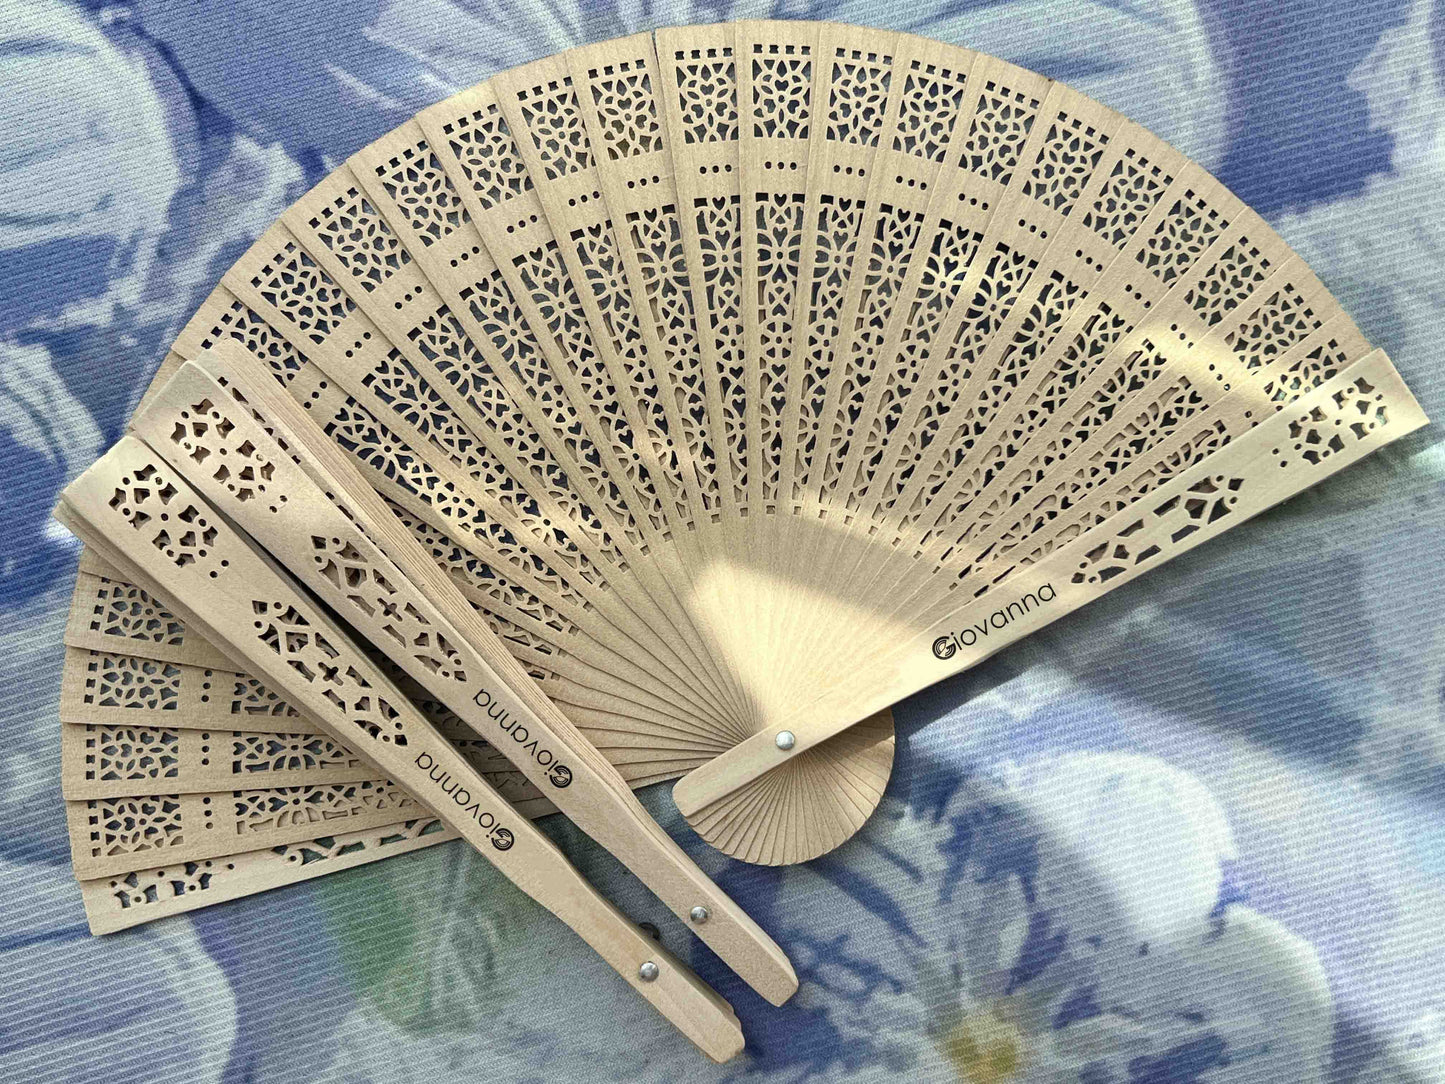 Giovanna Hand Fans Wedding Party Favors Gifts for Guests Folding Hand fans